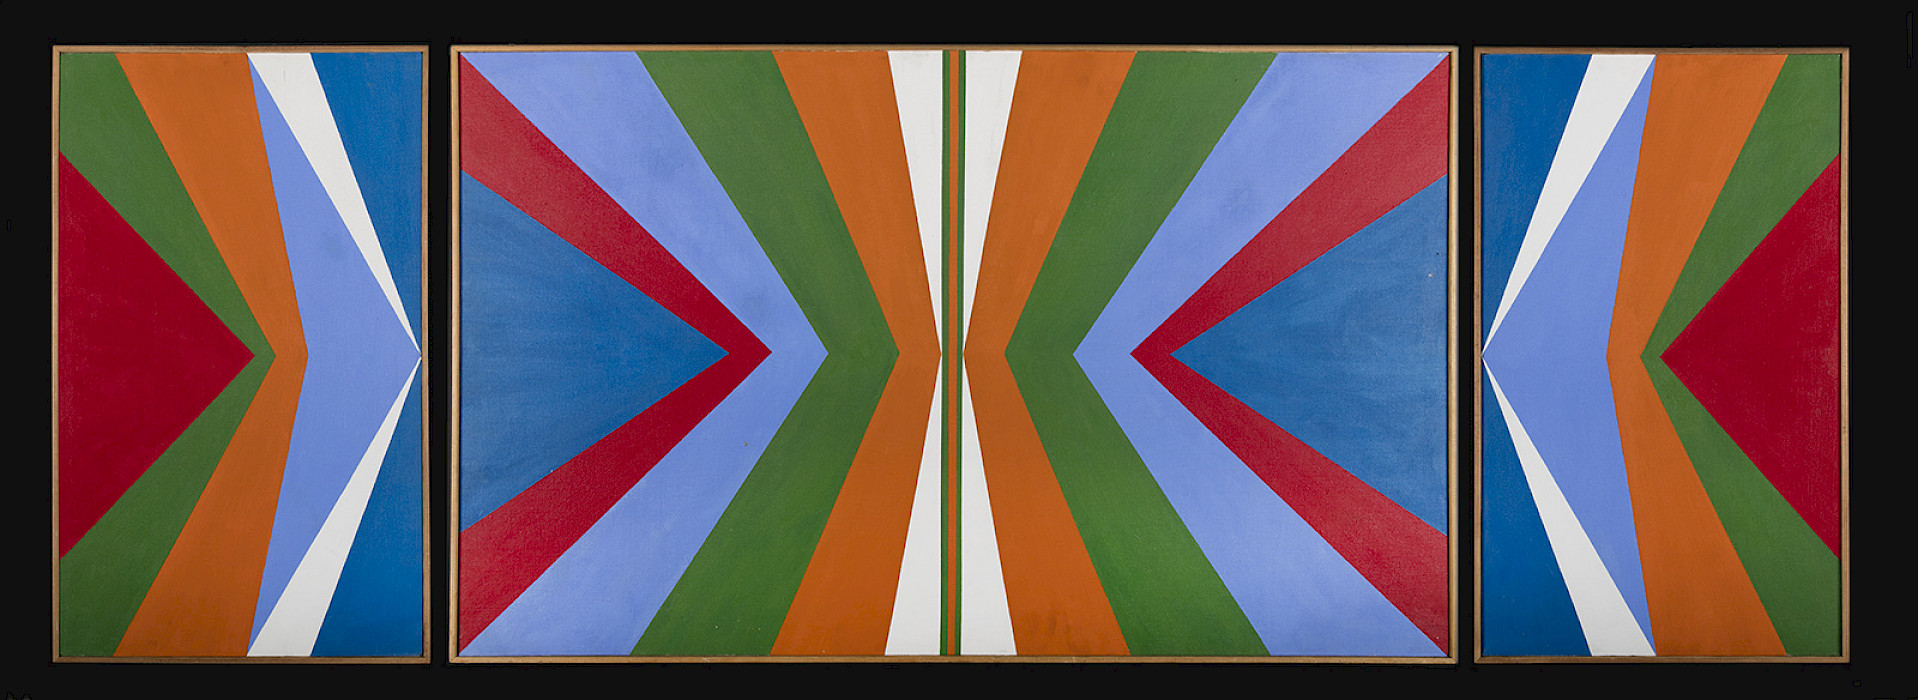 Harvey Herman (Očhéthi Šakówiŋ, 1952 - ), "Geometric #4 (triptych)," circa 1971, oil on canvas, 33 3/4 x 98 1/4 x 1 1/2 in., On loan from the IAIA Museum of Contemporary Native Arts Collection: Honors Collection, S-78, S-79, S-80.